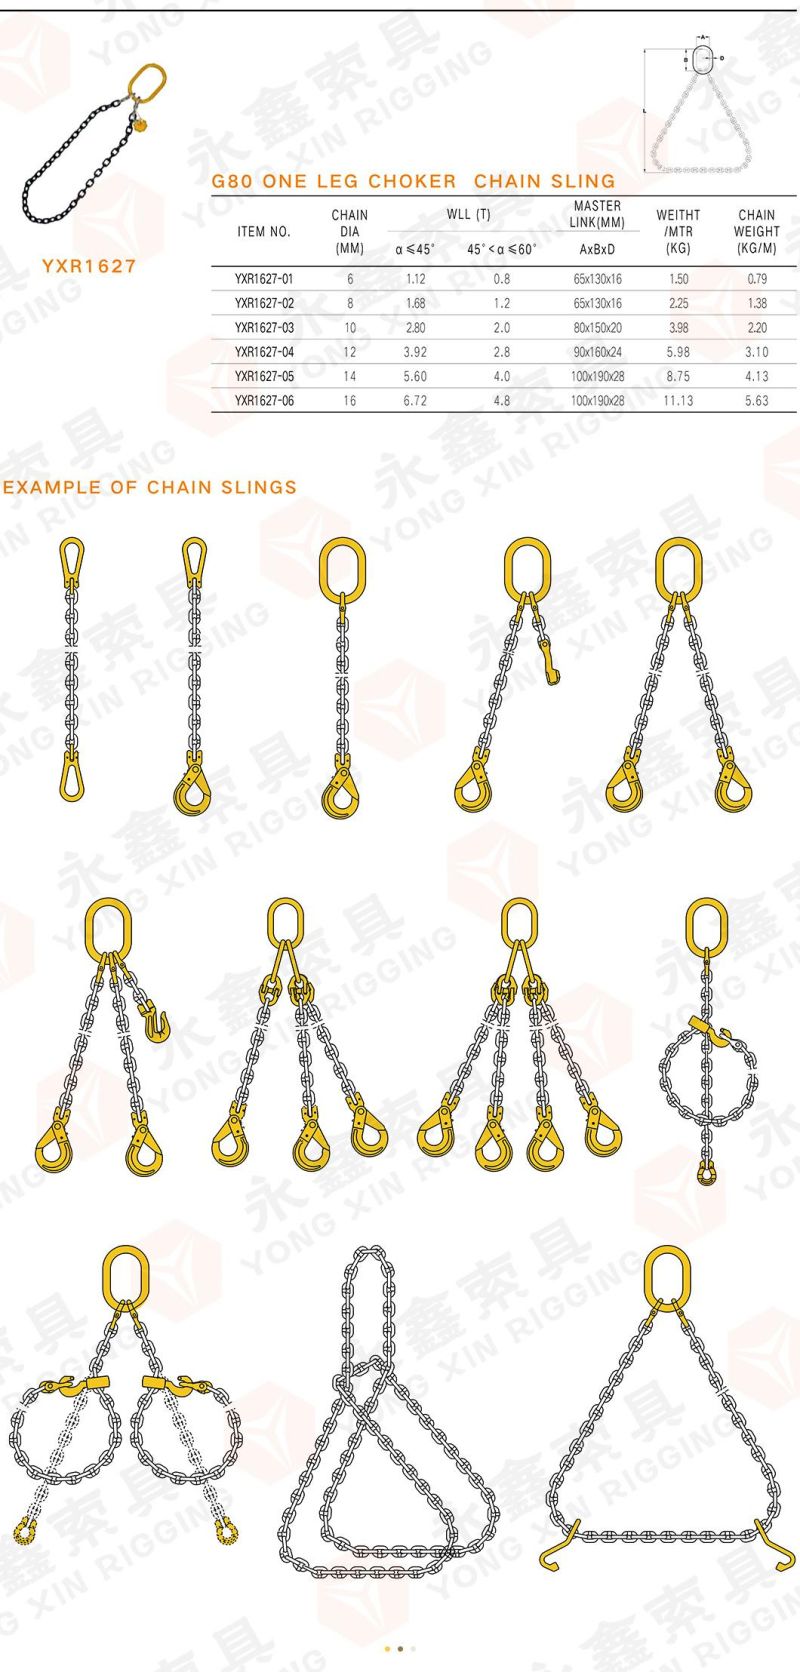 Alloy Steel G80 Lifting Chain Sling/Lifting Chain with Hooks